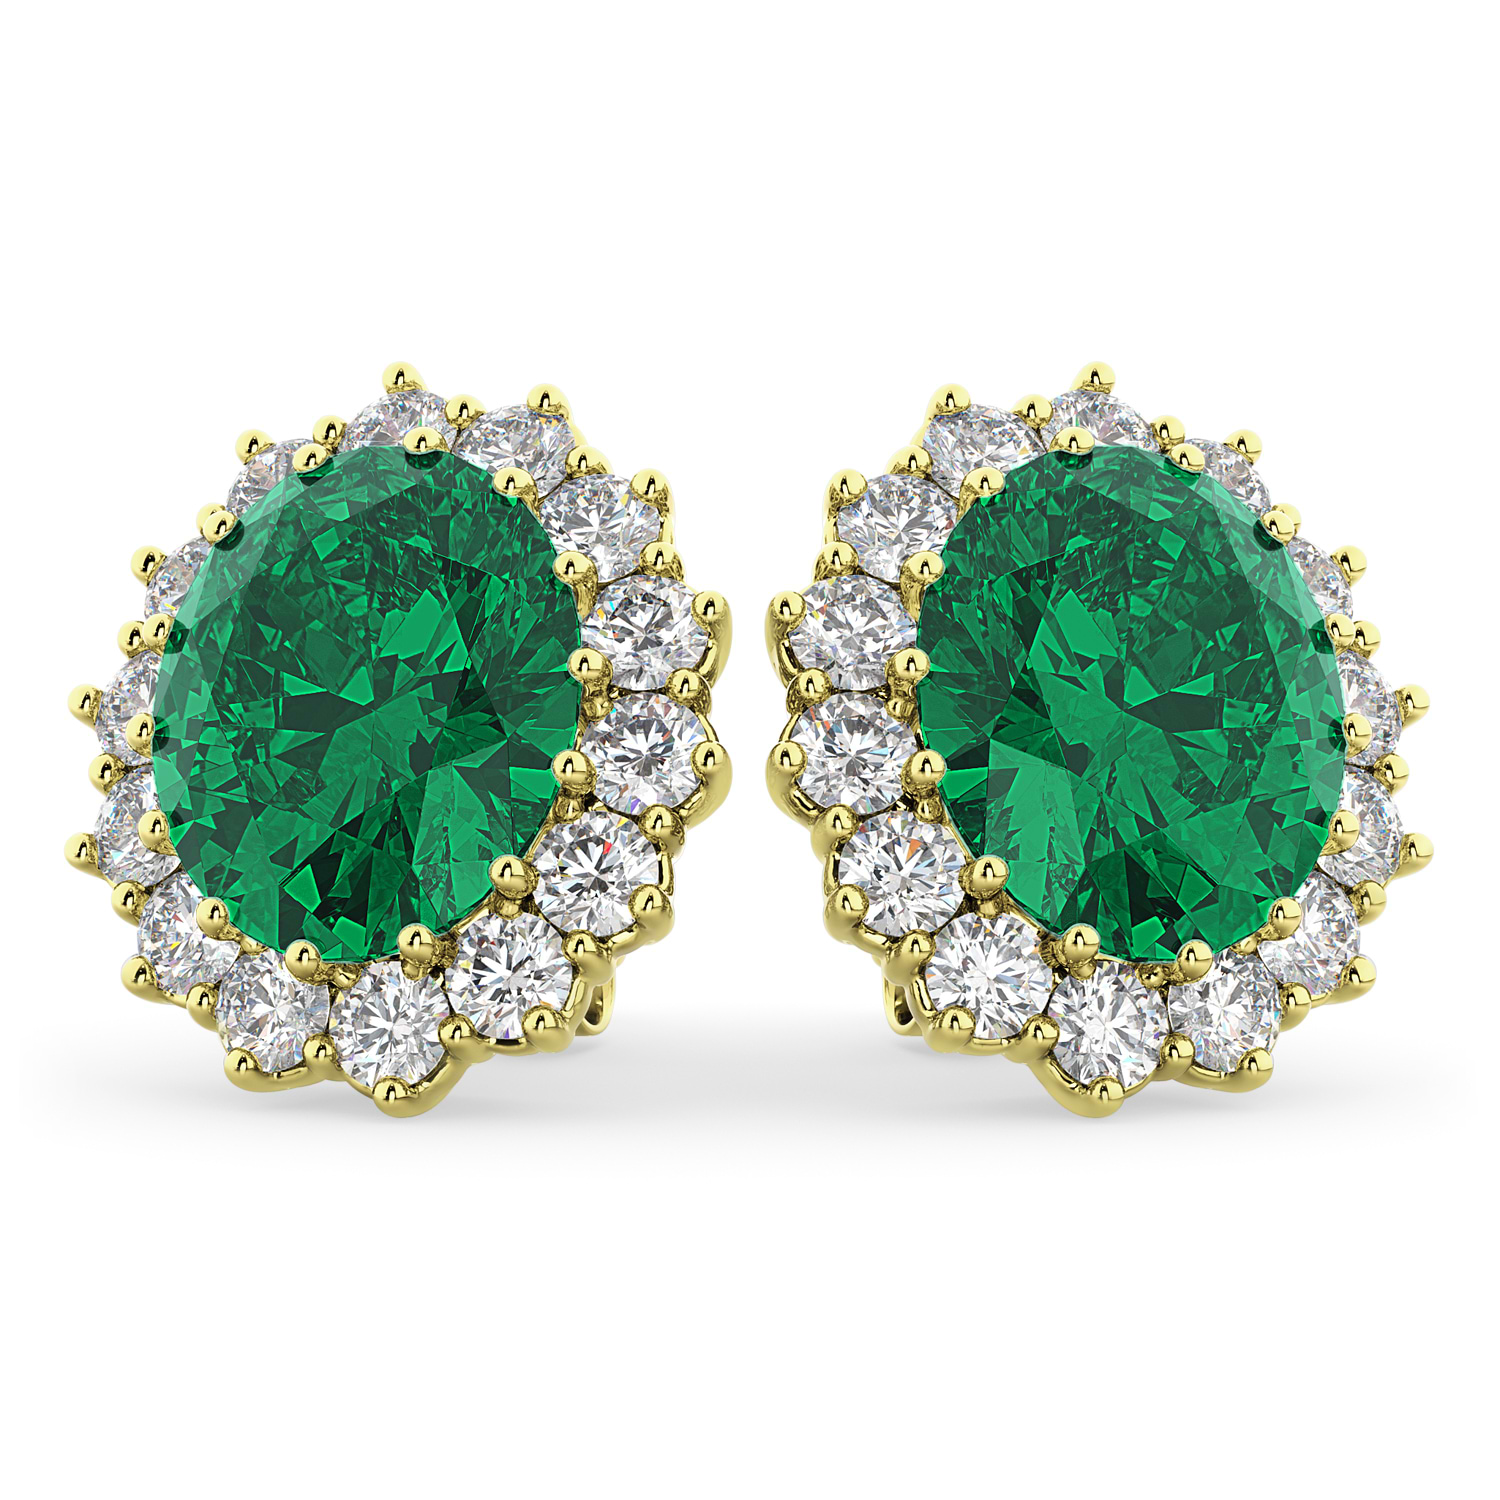 Oval Lab Emerald and Diamond Earrings 14k Yellow Gold (10.80ctw)